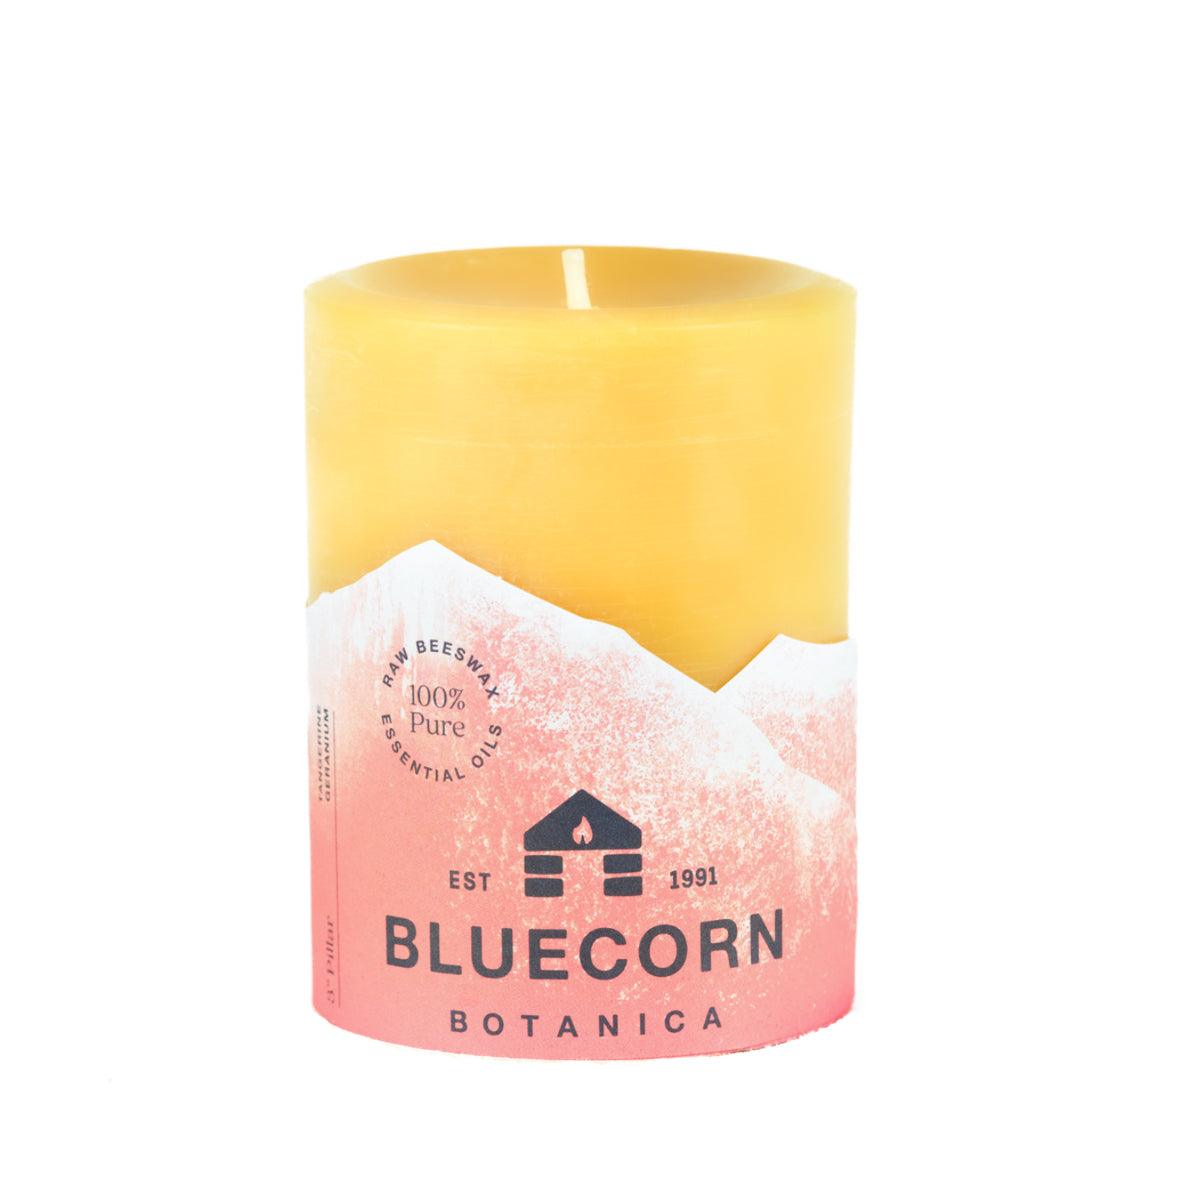 Bluecorn Botanica 100% Pure Beeswax Tangerine and Geranium 3" x 4" Scented Pillar Candle. Burn Time: 60 hours. Made with 100% Pure Beeswax, 100% Pure Essential Oils, and a 100% pure cotton wick, no lead. Candles are paraffin free, clean burning and non-toxic. Features Bluecorn Botanica label in Orange printed on 100% recycled paper. Wax is golden in color.